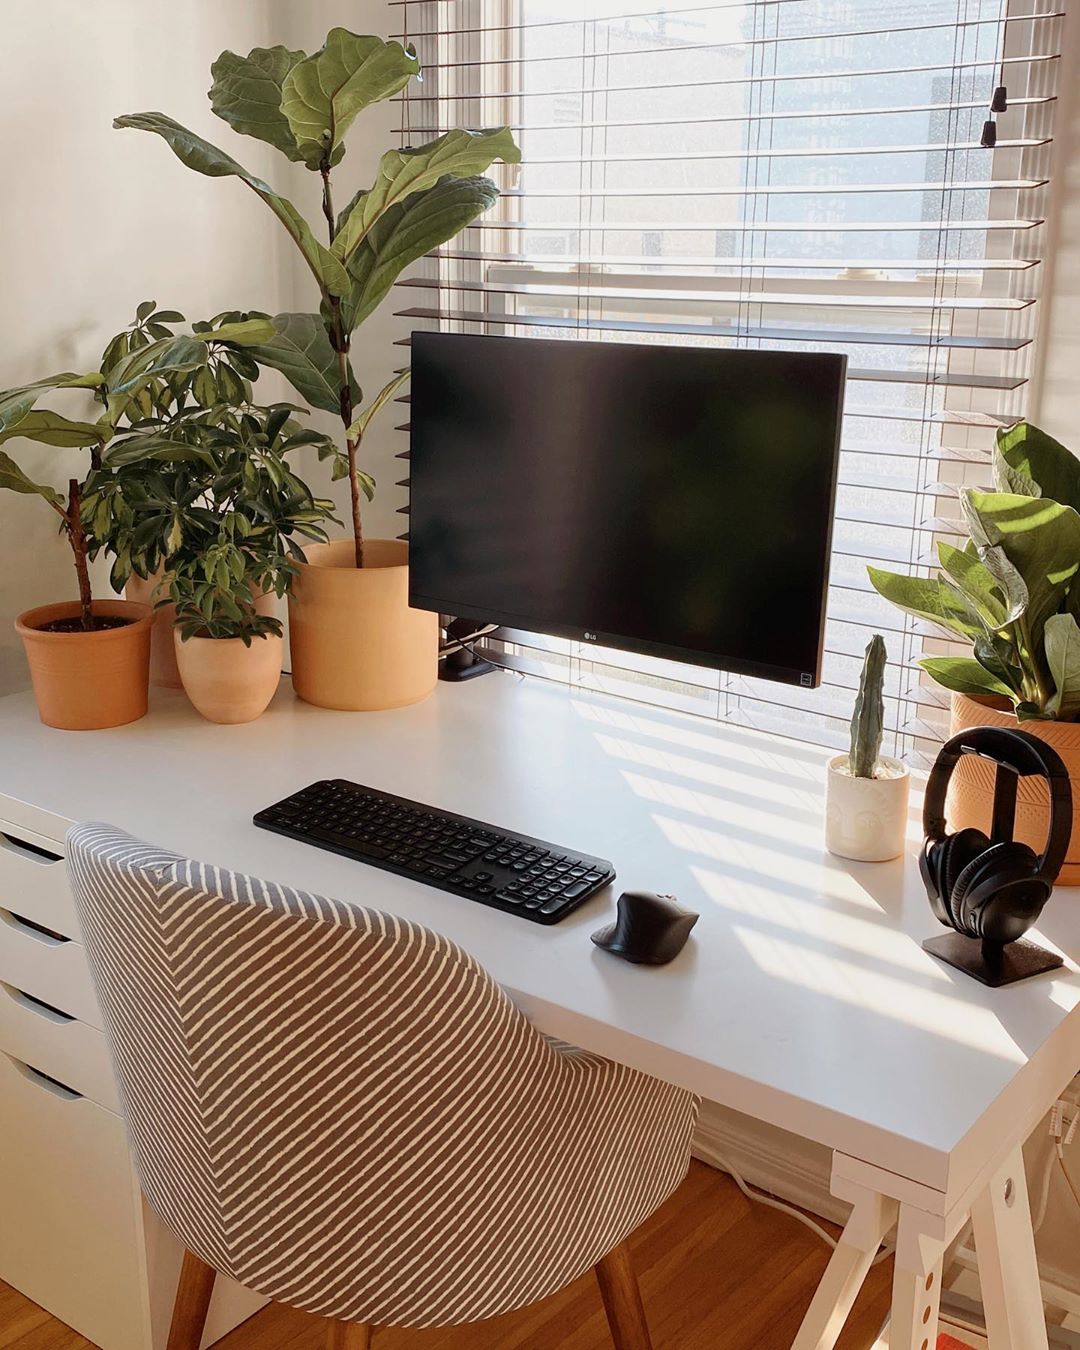 Desk with computer surrounded by plants. Photo by Instagram user @ashleyhosmer